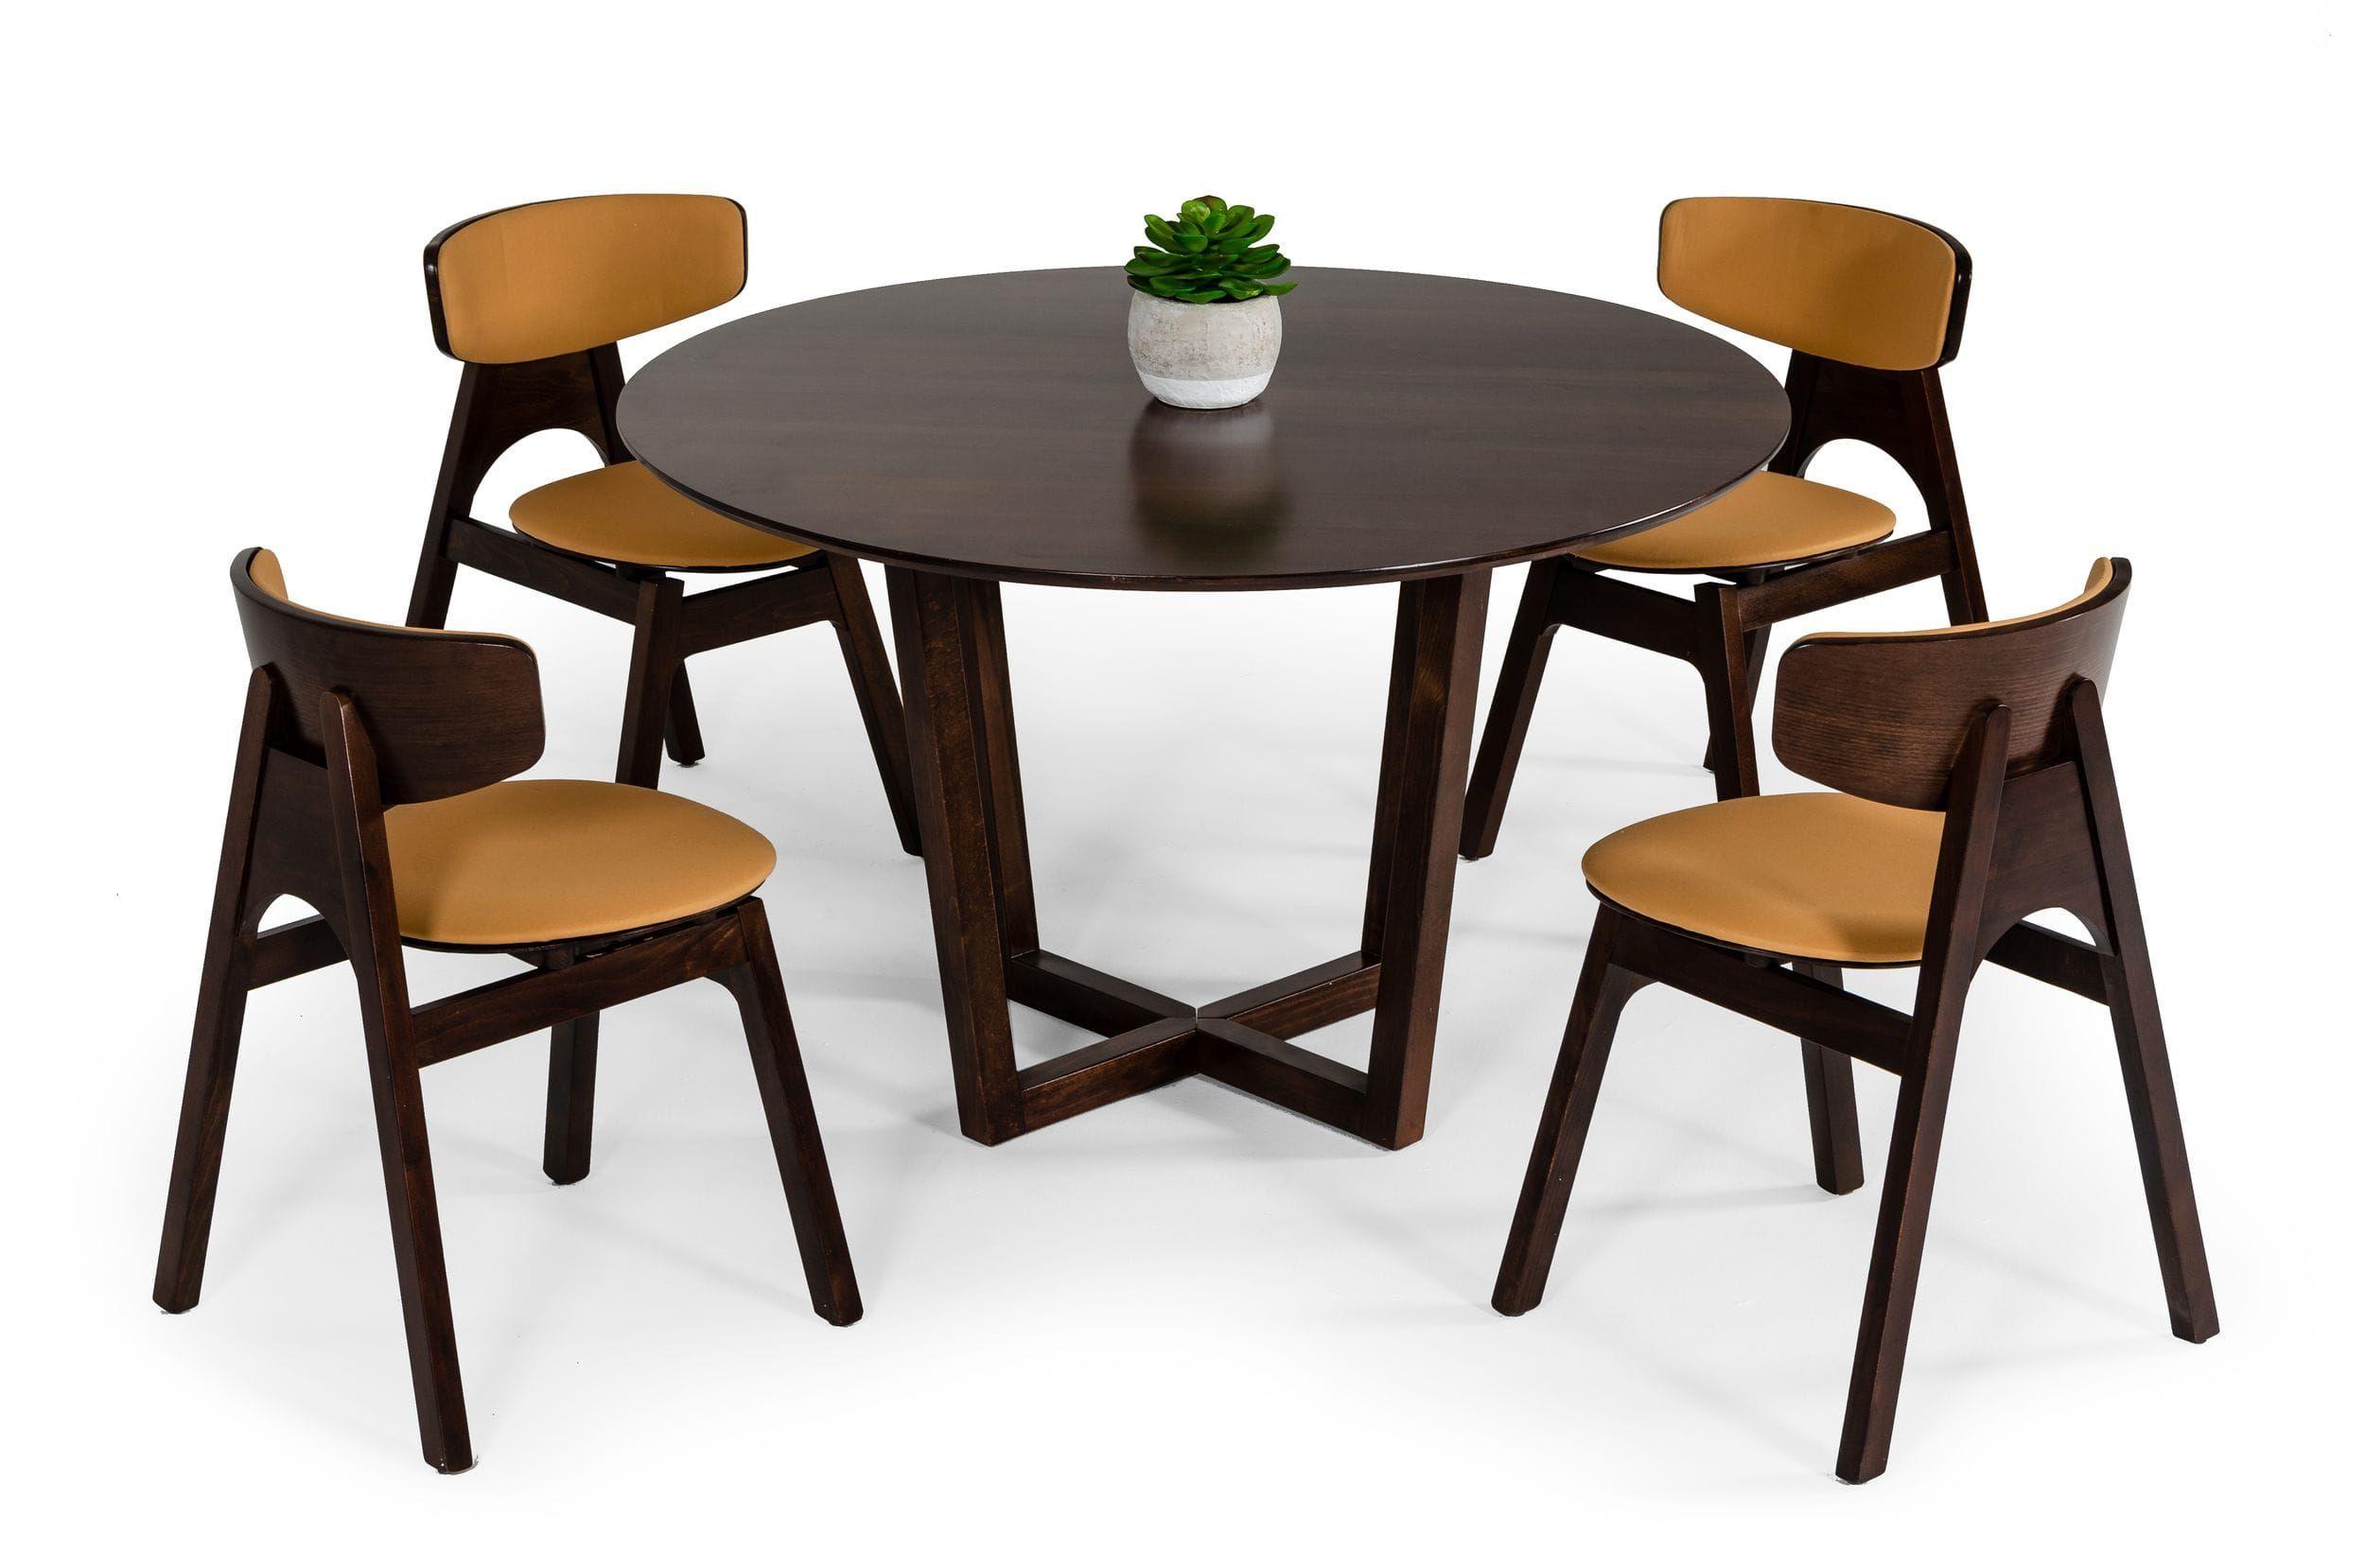 Contemporary, Modern Dining Table Set VGTSWESTON-DT-Set-5 VGTSWESTON-DT-Set-5 in Camel, Walnut Faux Leather